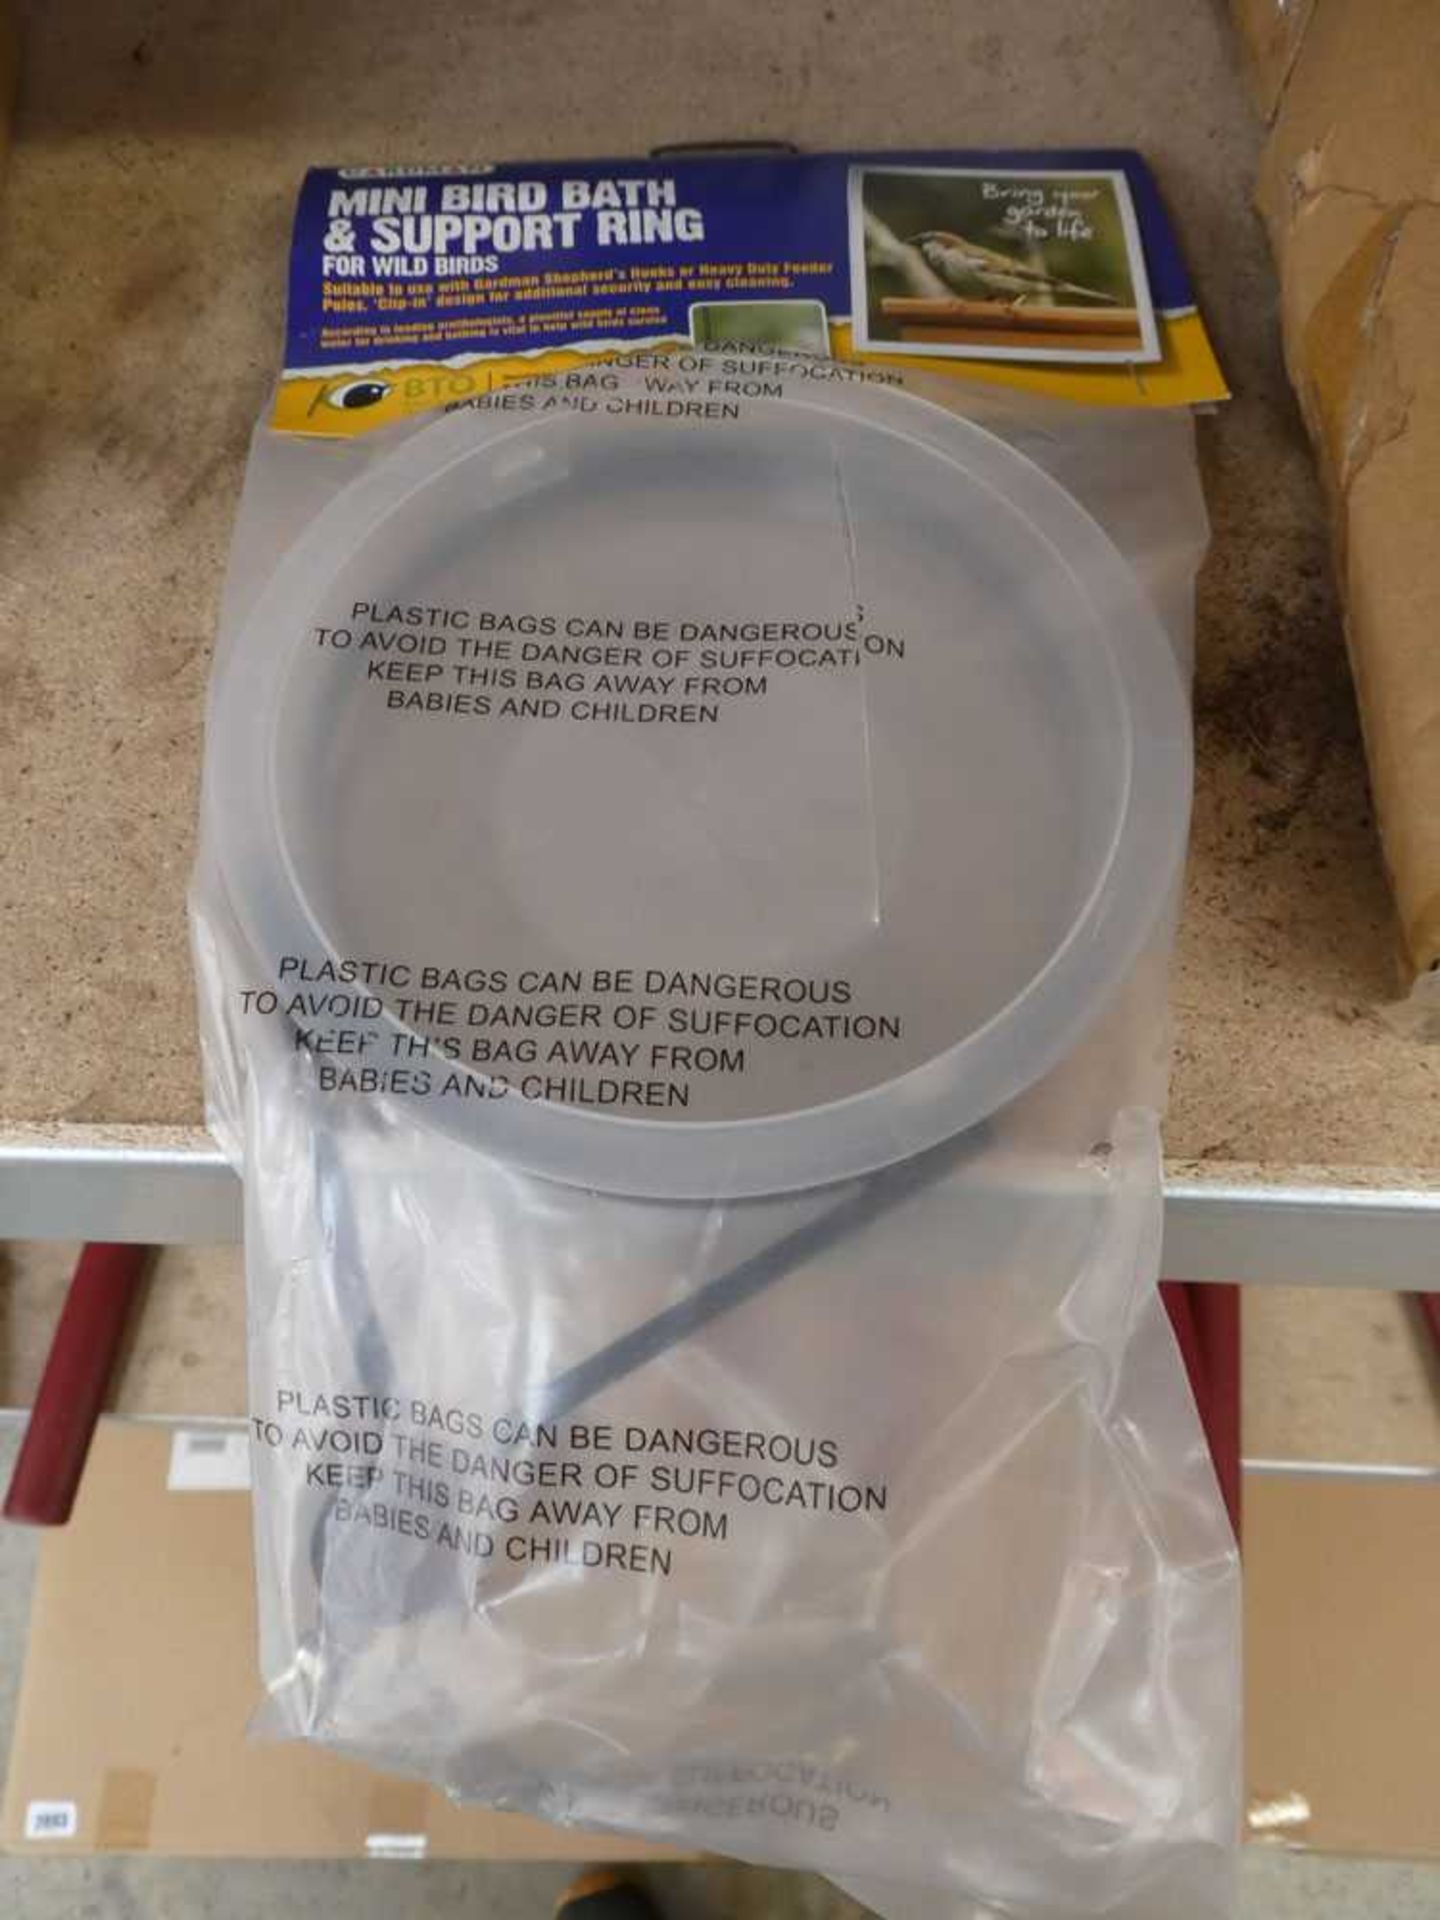 2 boxes containing 12 mini bird bath ring supports